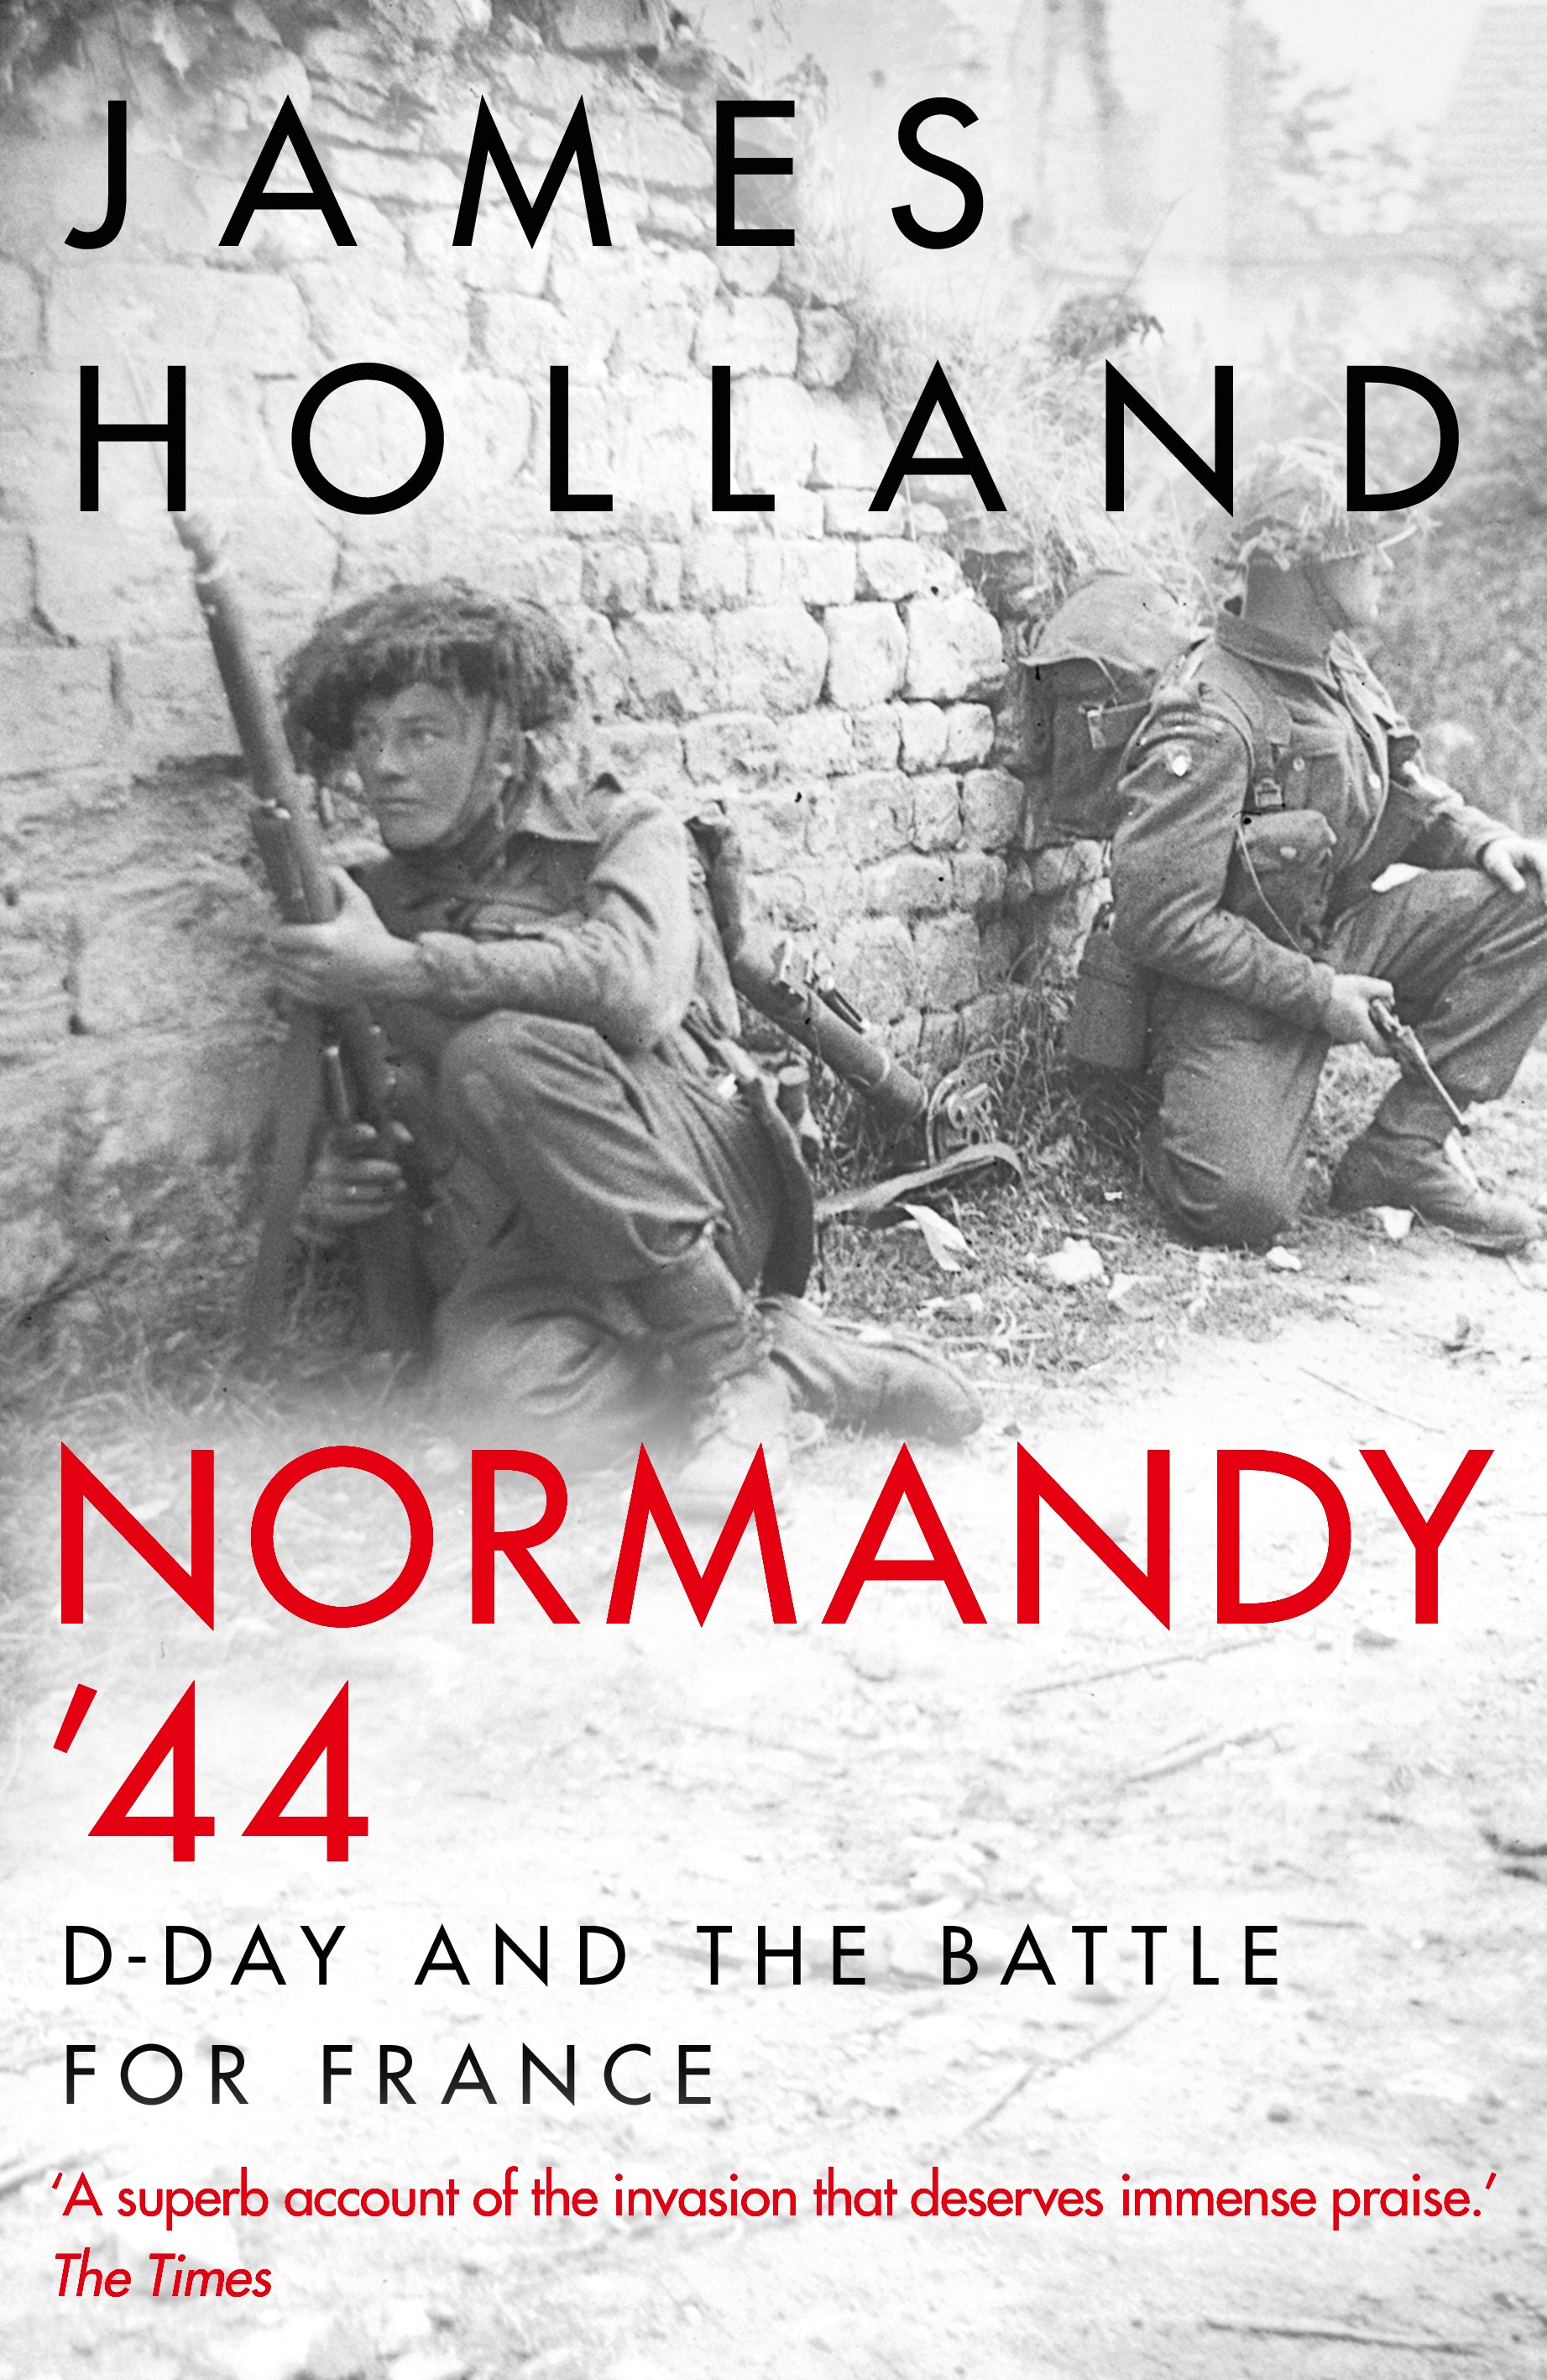 Book “Normandy ‘44” by James Holland — May 16, 2019